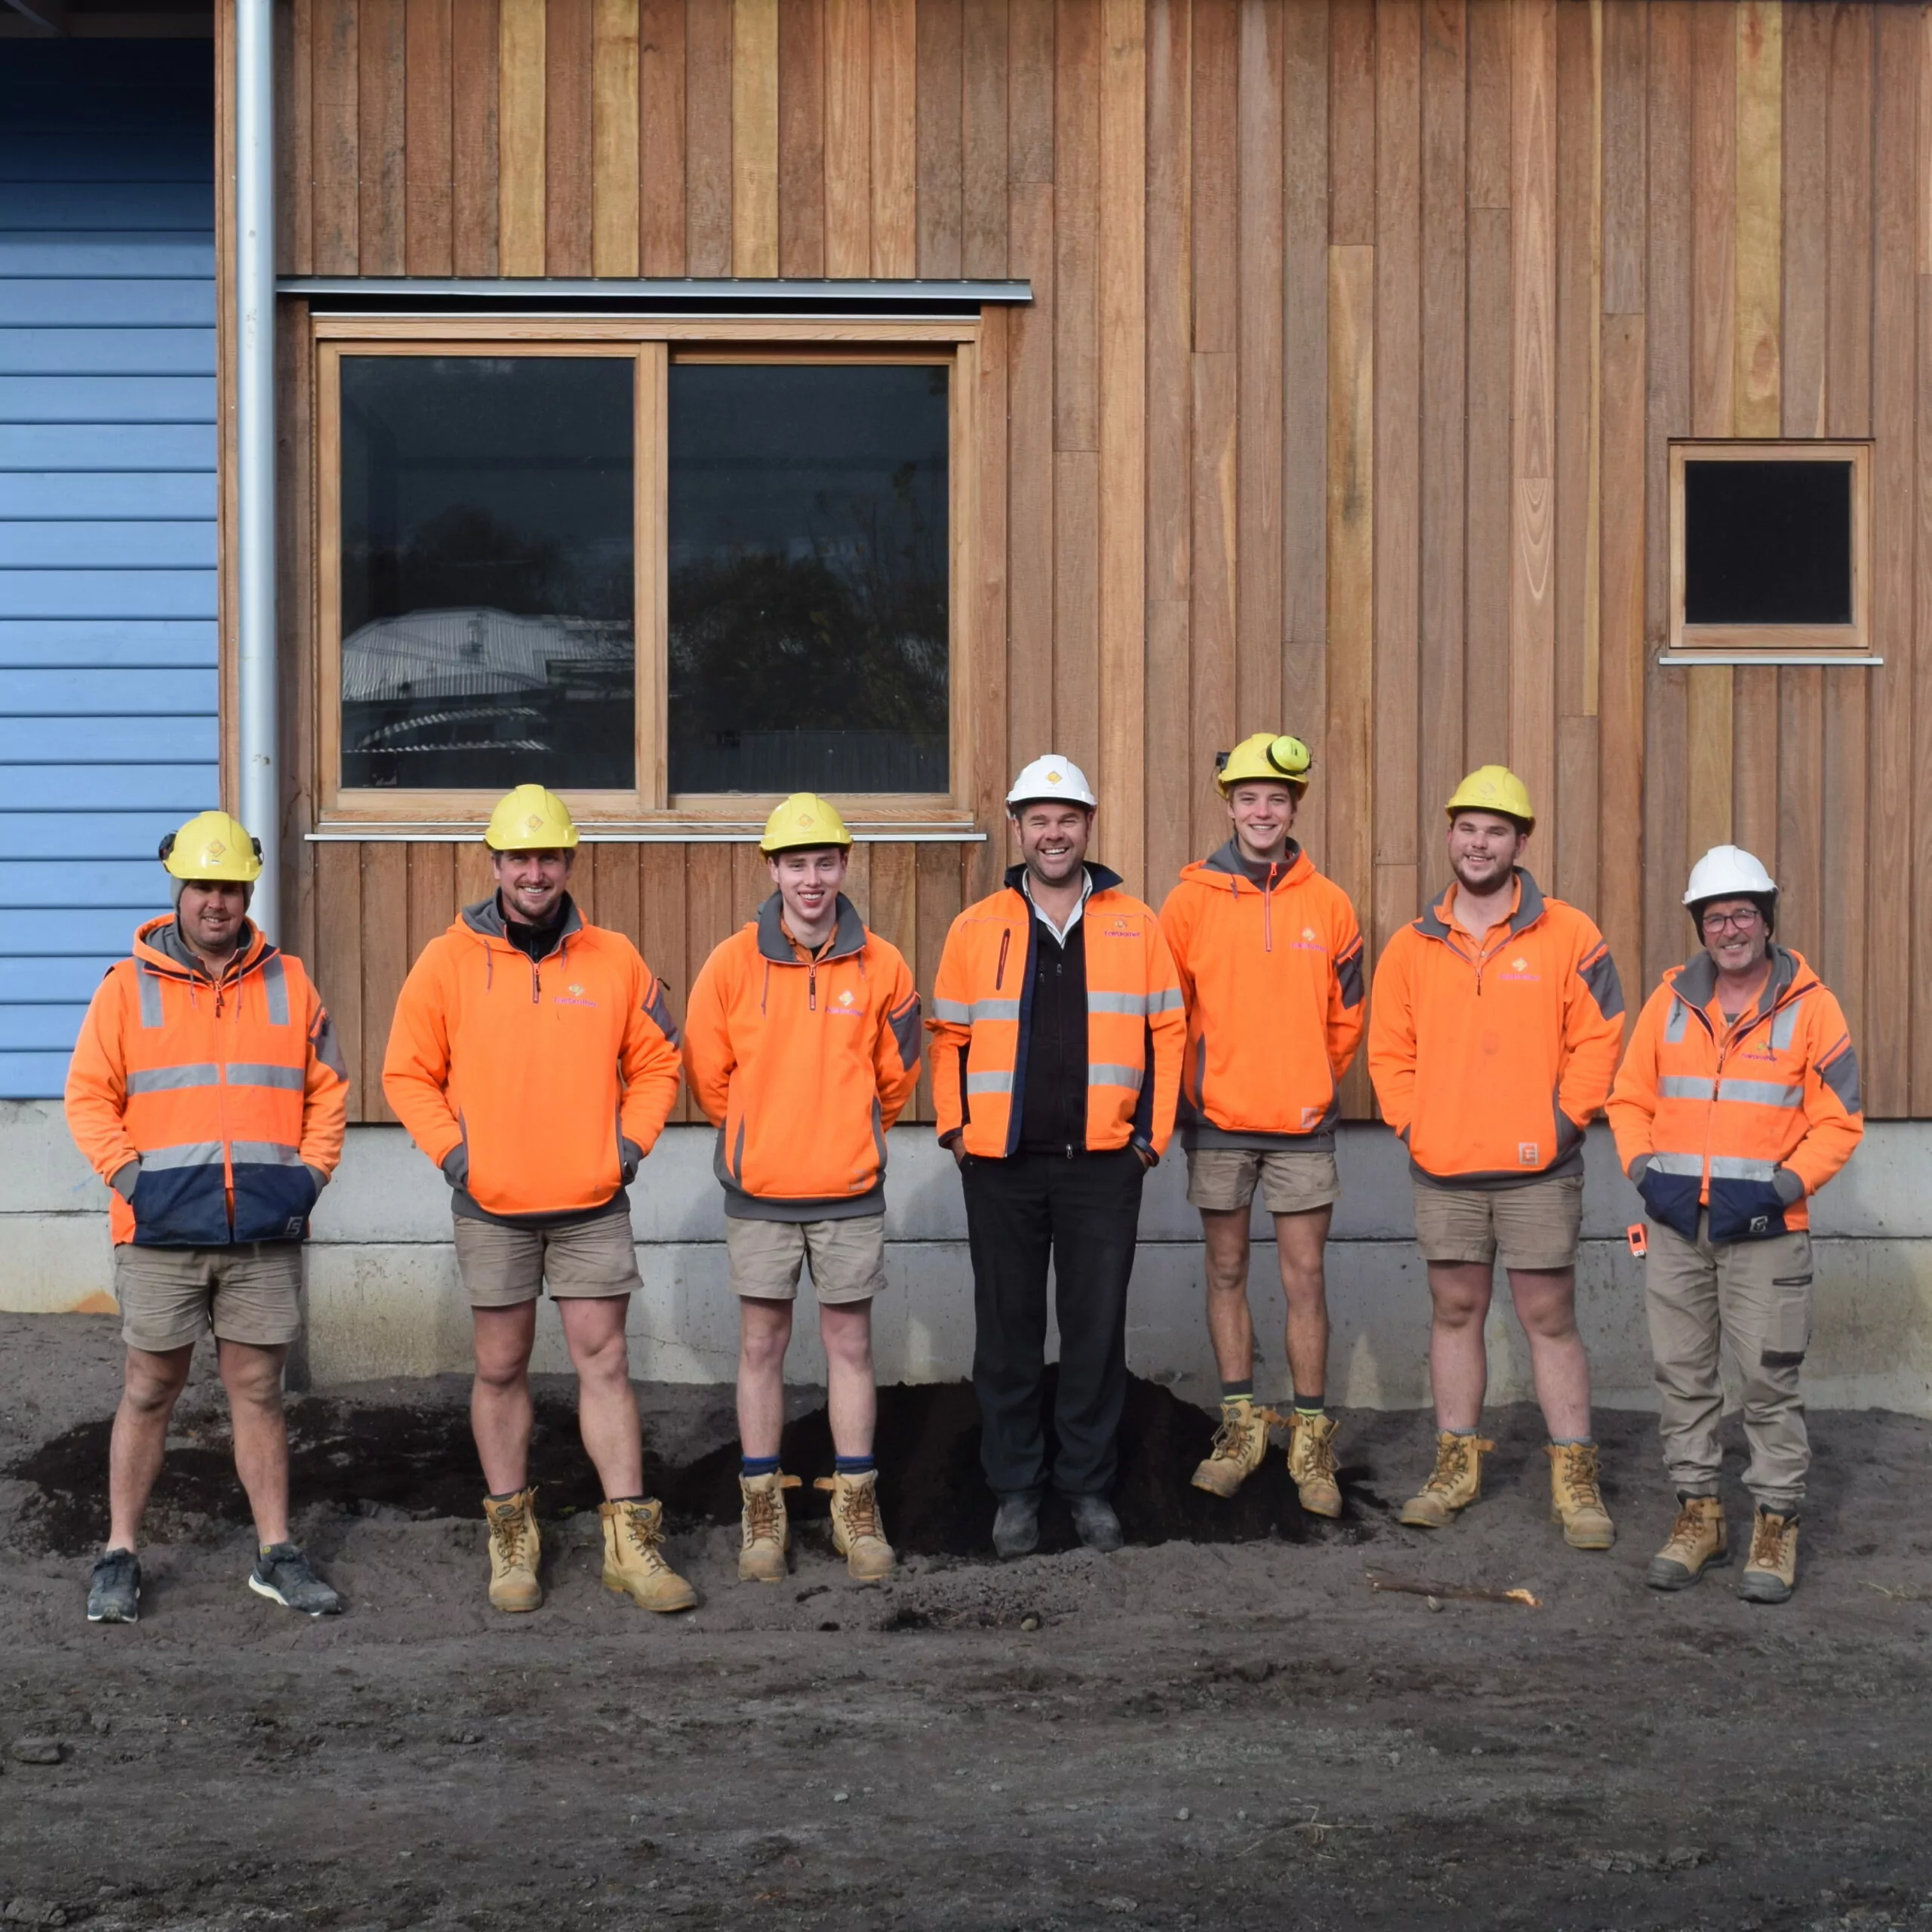 Seven construction workers in high vis clothing and hard hats standing on an active construction site. The wall they're standing in front of is of a building with a natural timber and blue weatherboard facade.